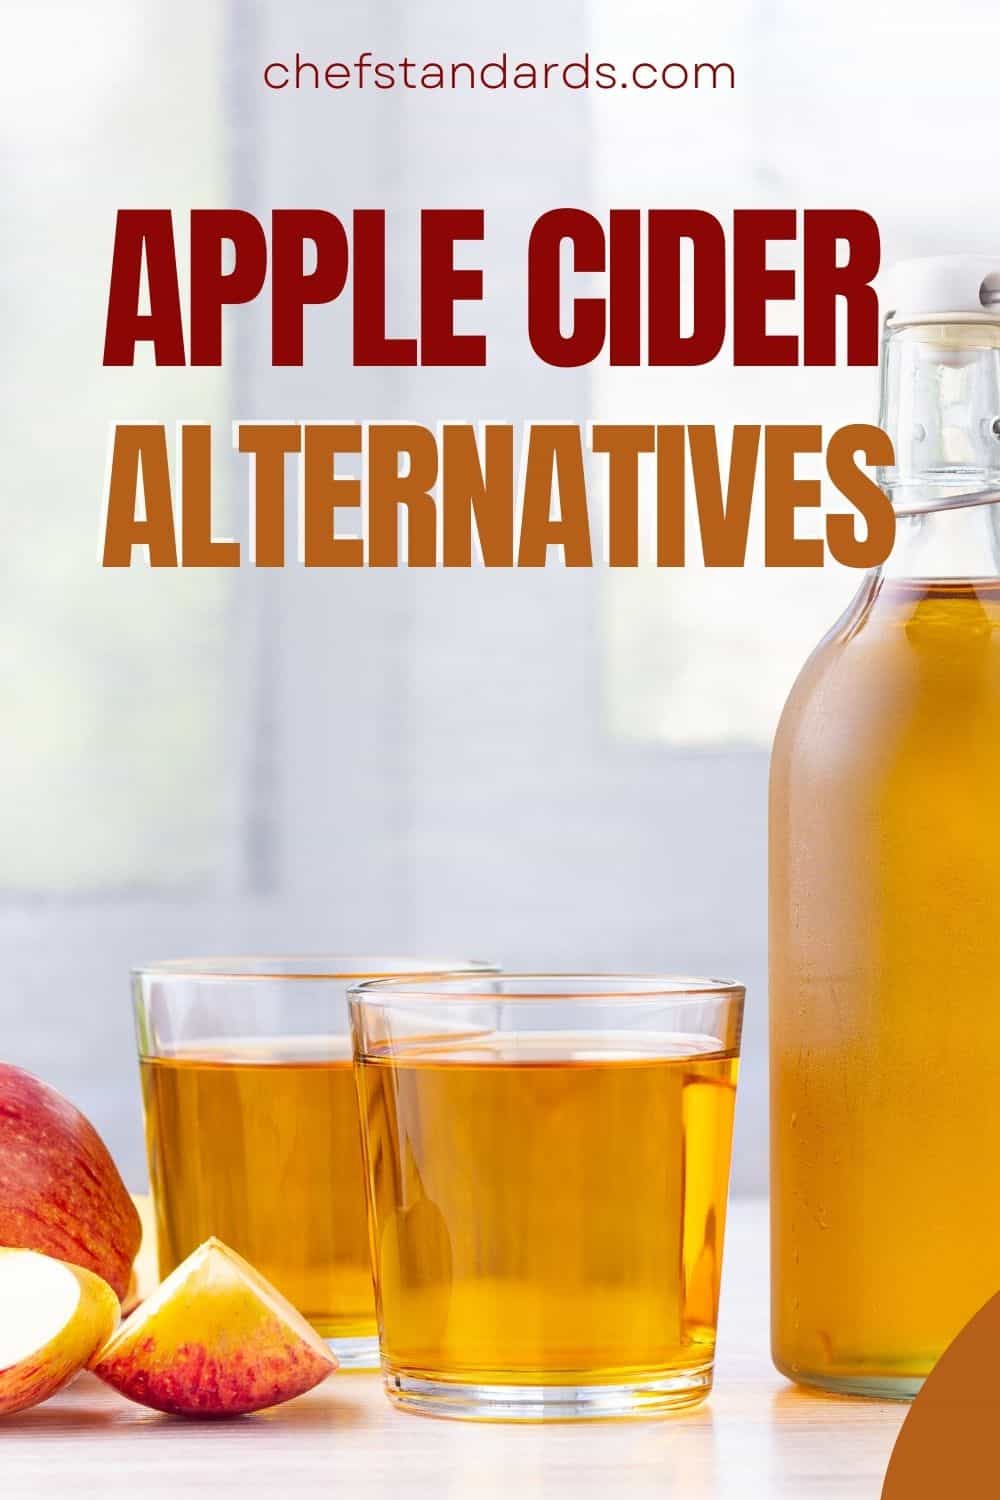 18 Tangy And Zesty Apple Cider Substitutes For Cooking
